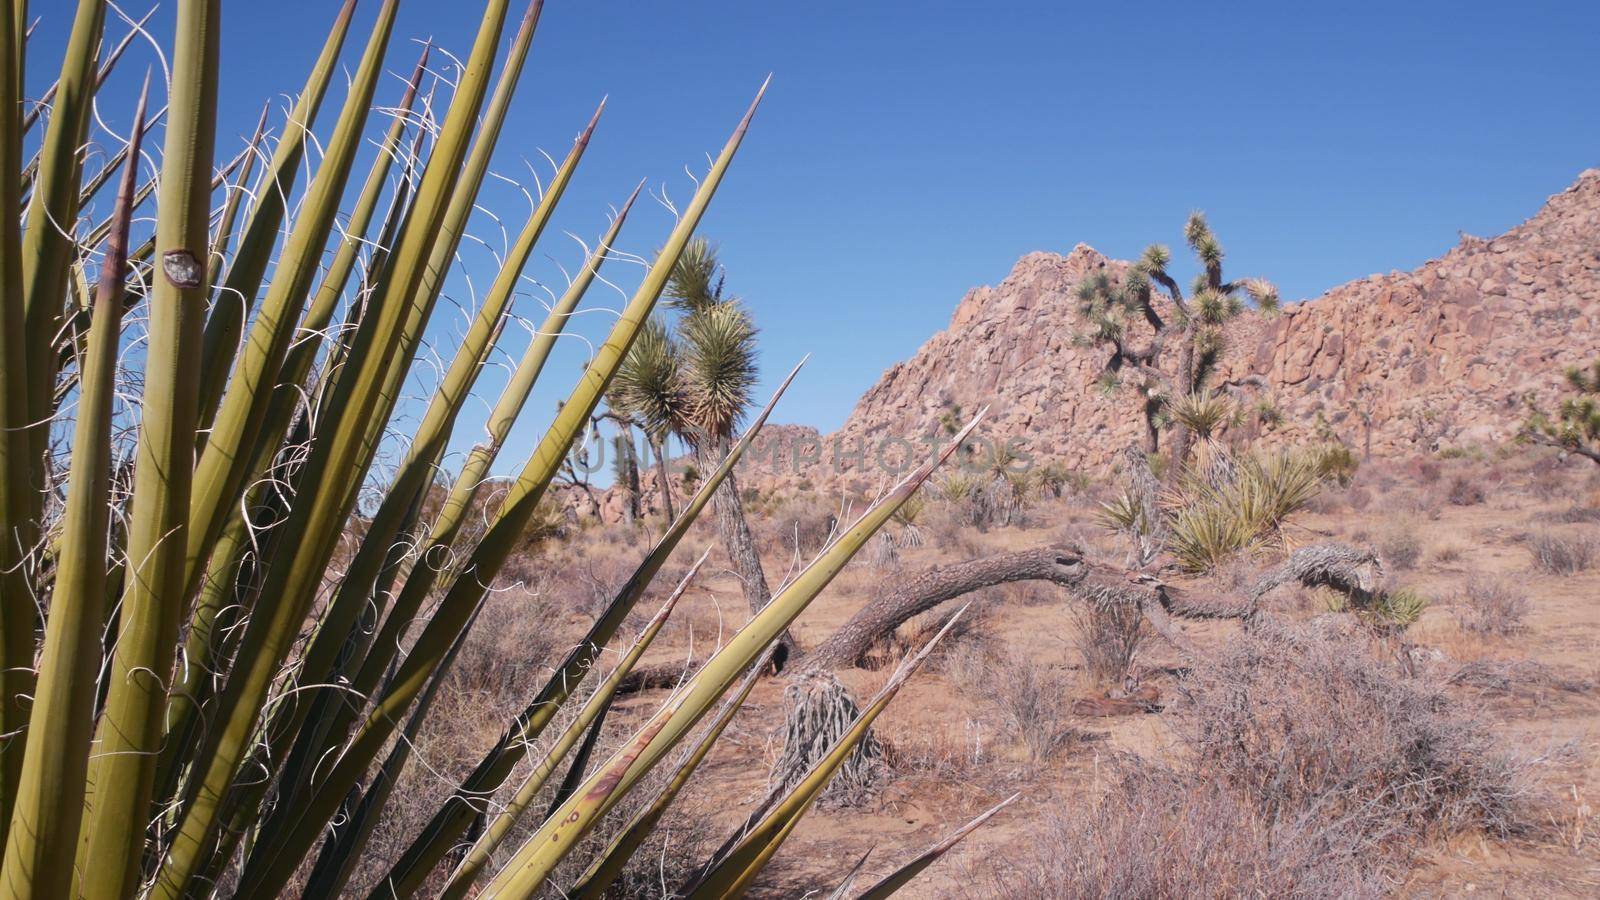 Desert flora, Joshua tree national park, California USA. Wild west and indian atmosphere, western arid climate. Valley wilderness, cactus succulents, agave and yucca plants. Dry waterless shrubland.